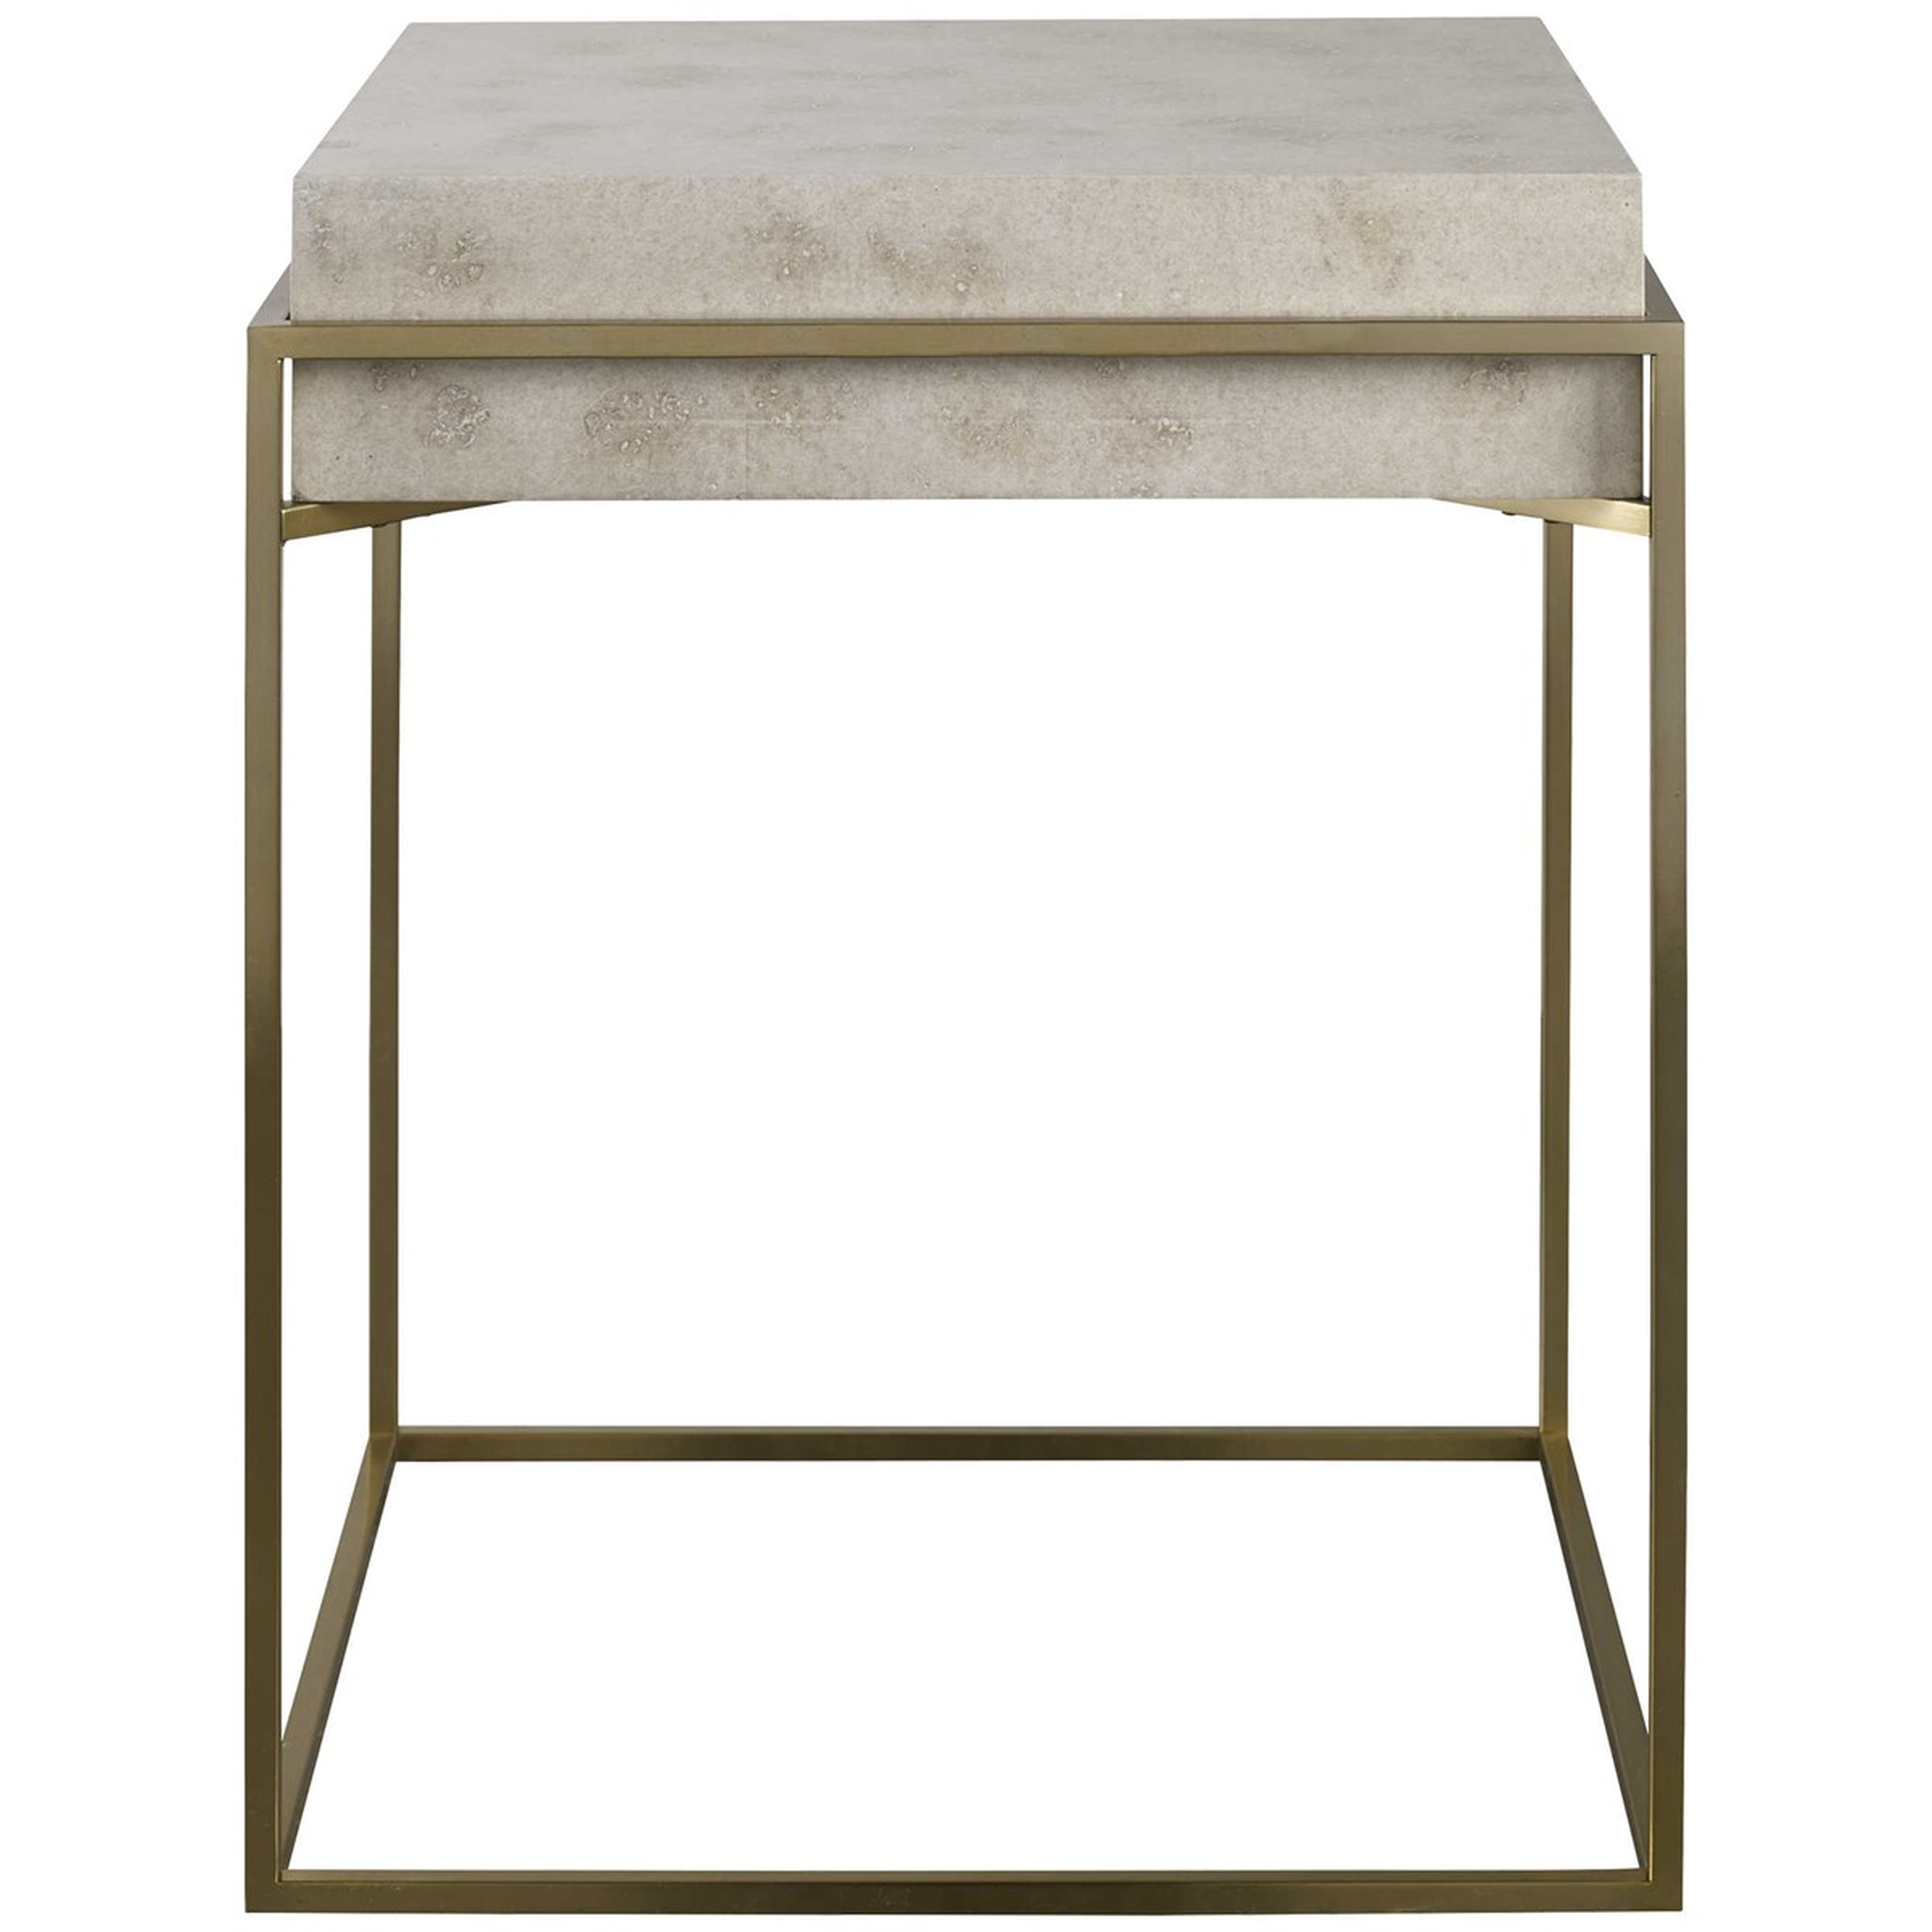 INDA ACCENT TABLE - Hudsonhill Foundry